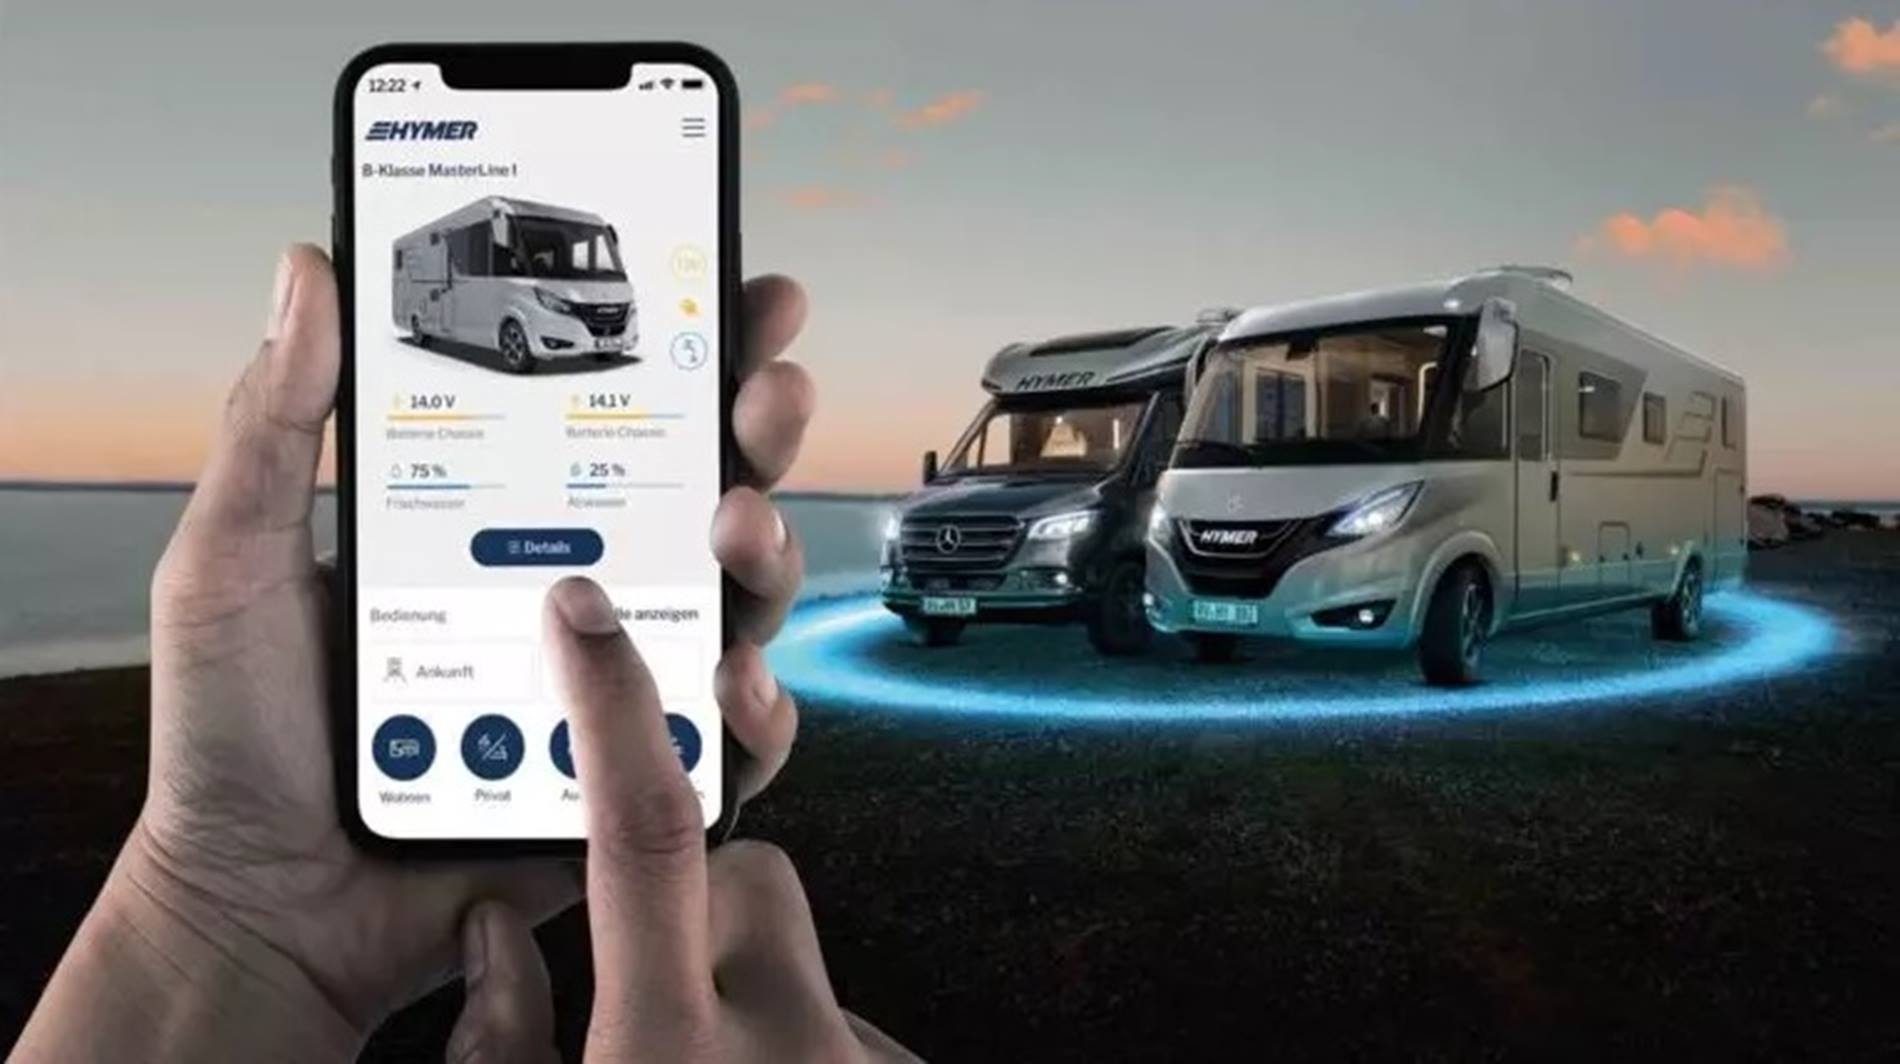 A smart home on wheels, intelligent condition monitoring and simple fleet management for motorhome rental companies